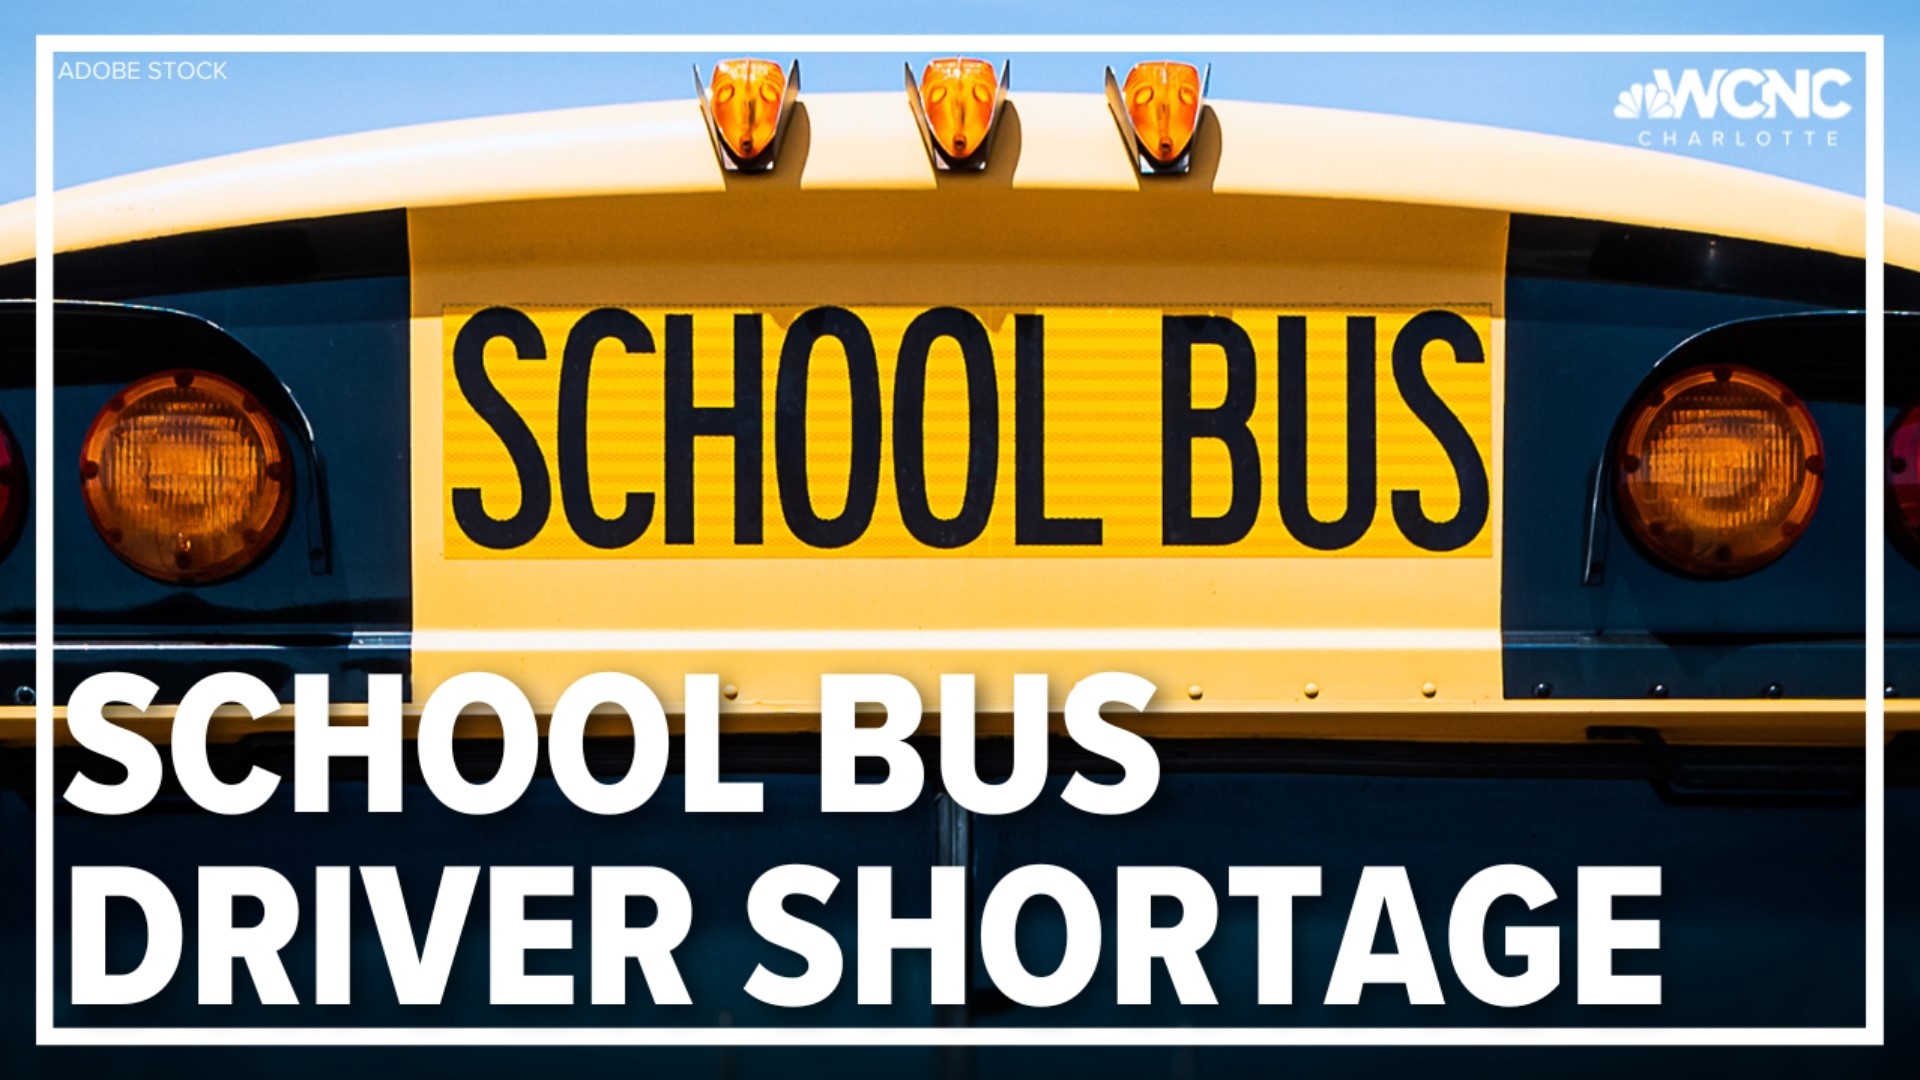 Newly and re-hired teacher’s assistants would be required to be substitute school bus drivers when needed.